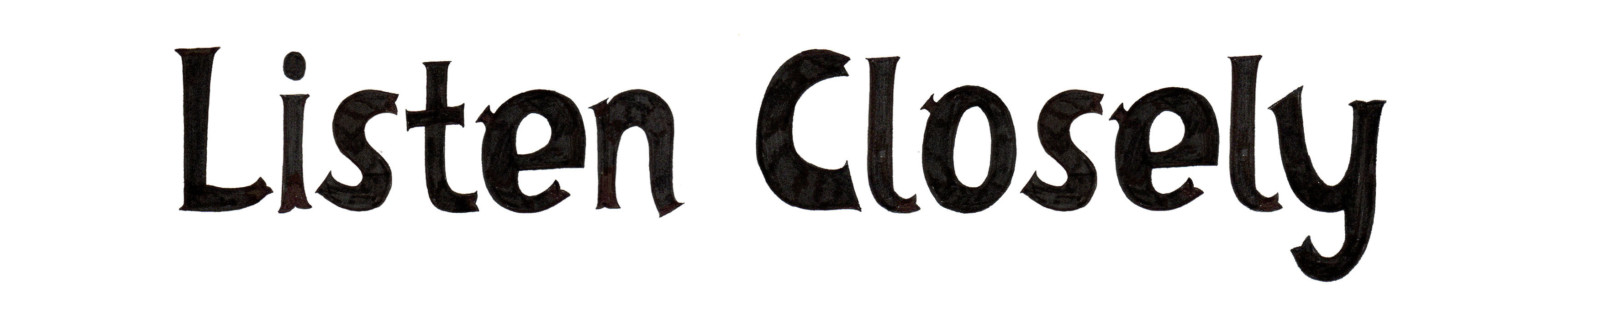 'Listen Closely' in black writing on white background.